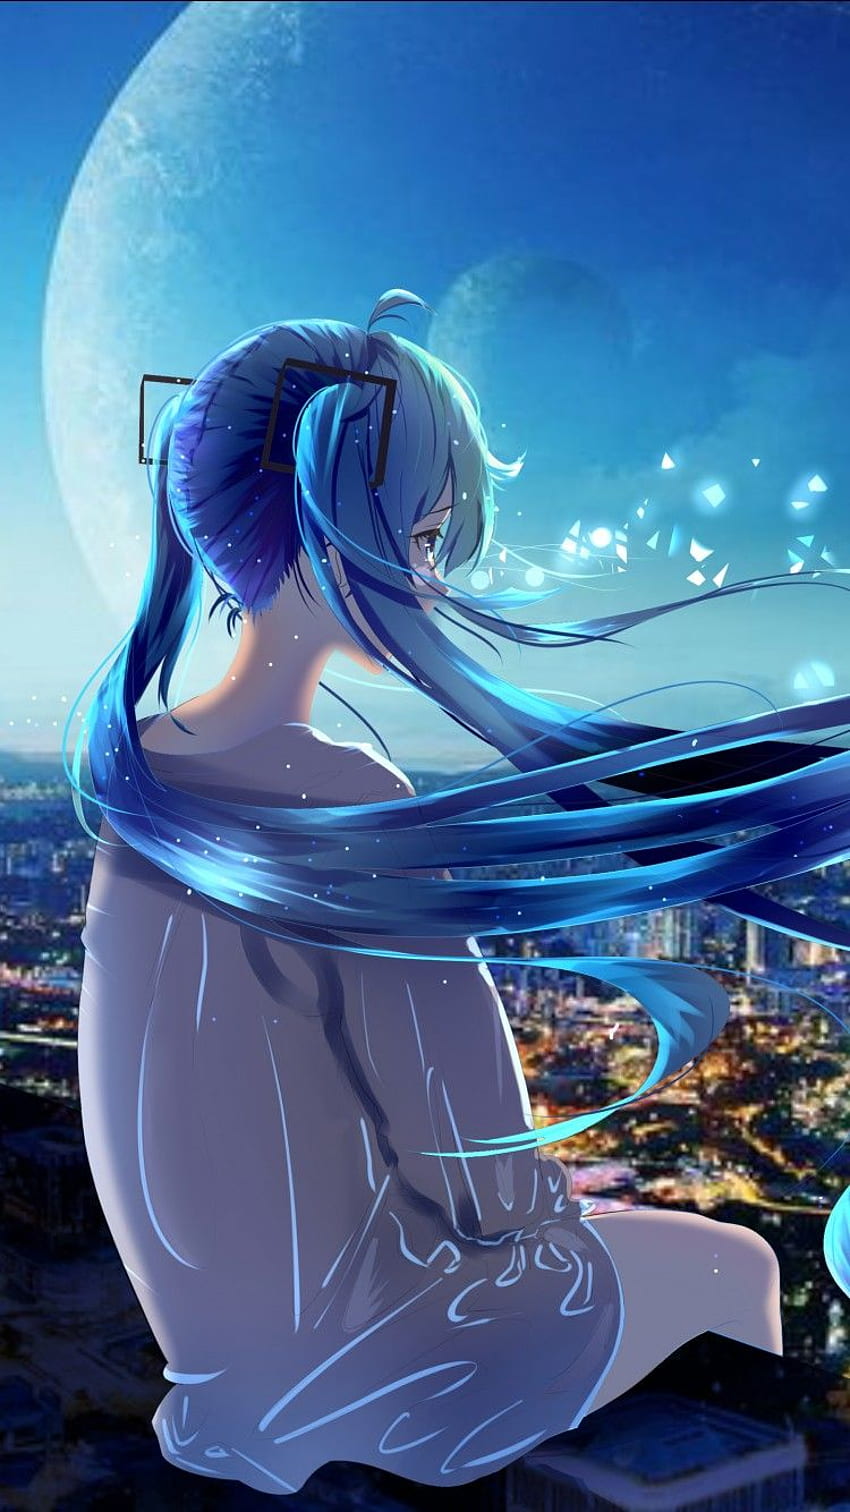 Anime Wallpaper Download Now In 4K Resolution - Best Wallpapers On Internet  Free To Download